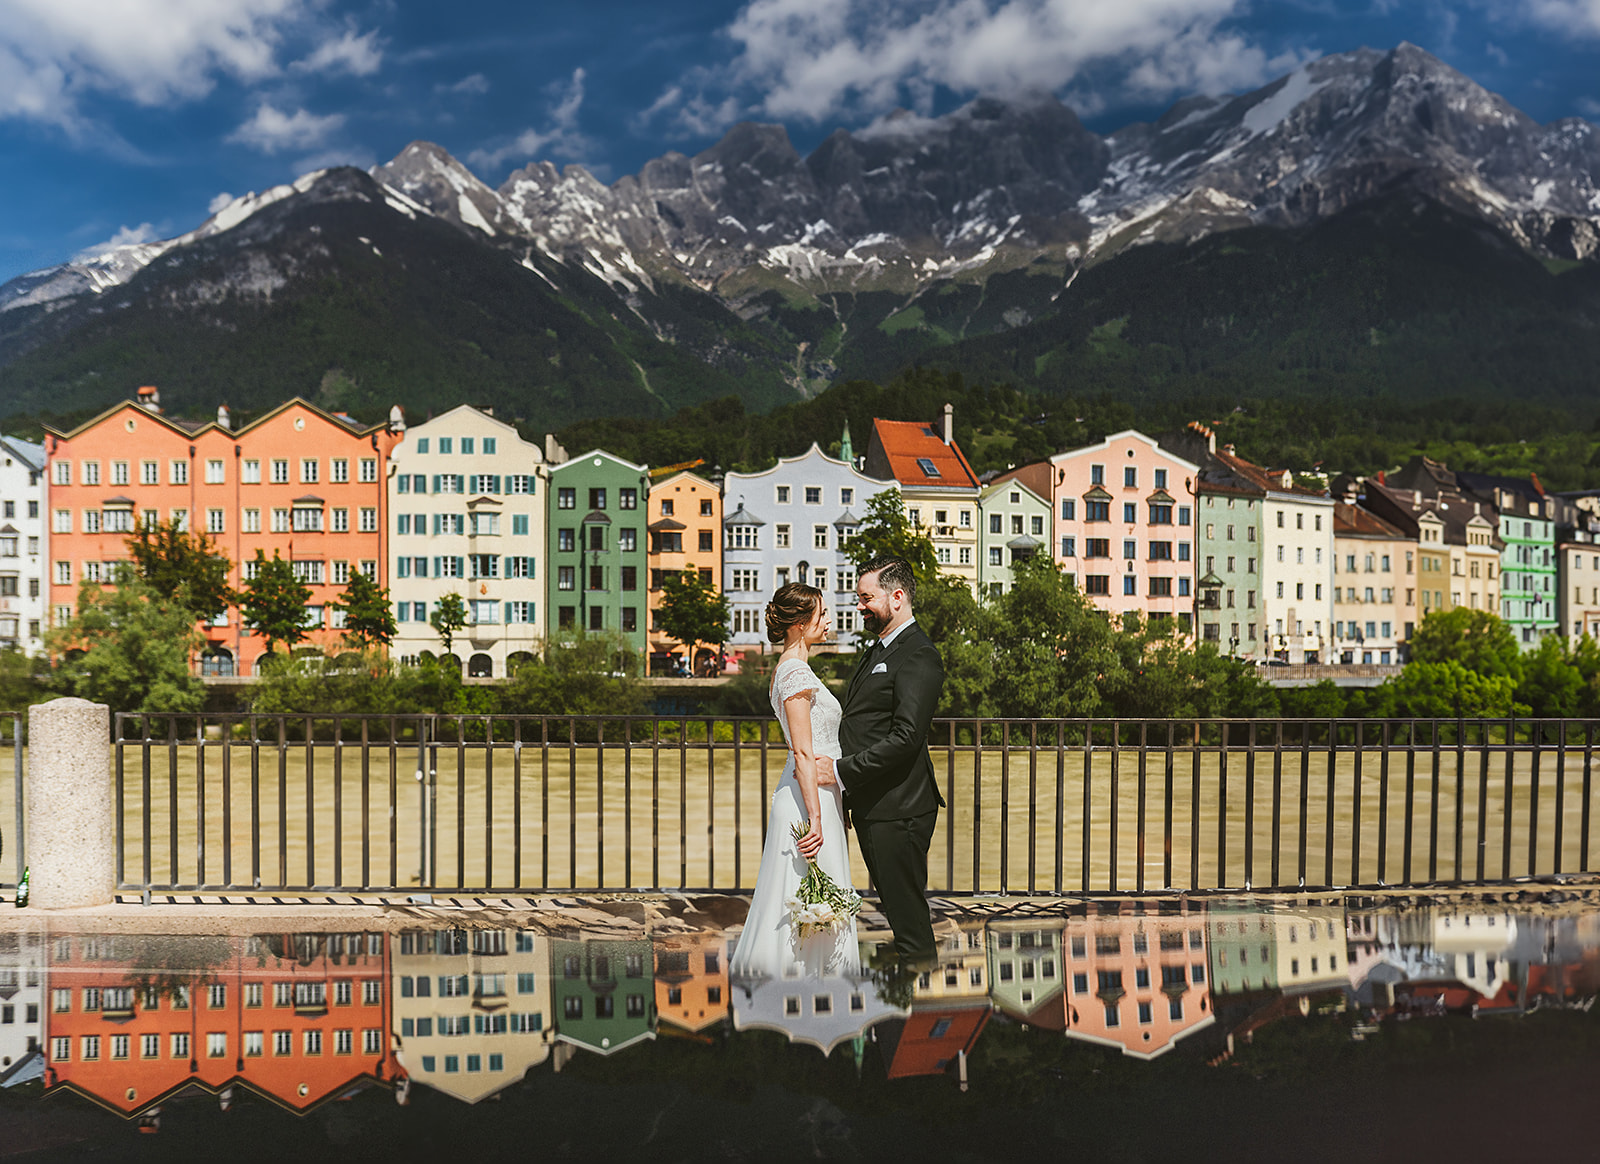 A bride and groom in front of colorful houses in the city of Innsbruck in the Tyrol